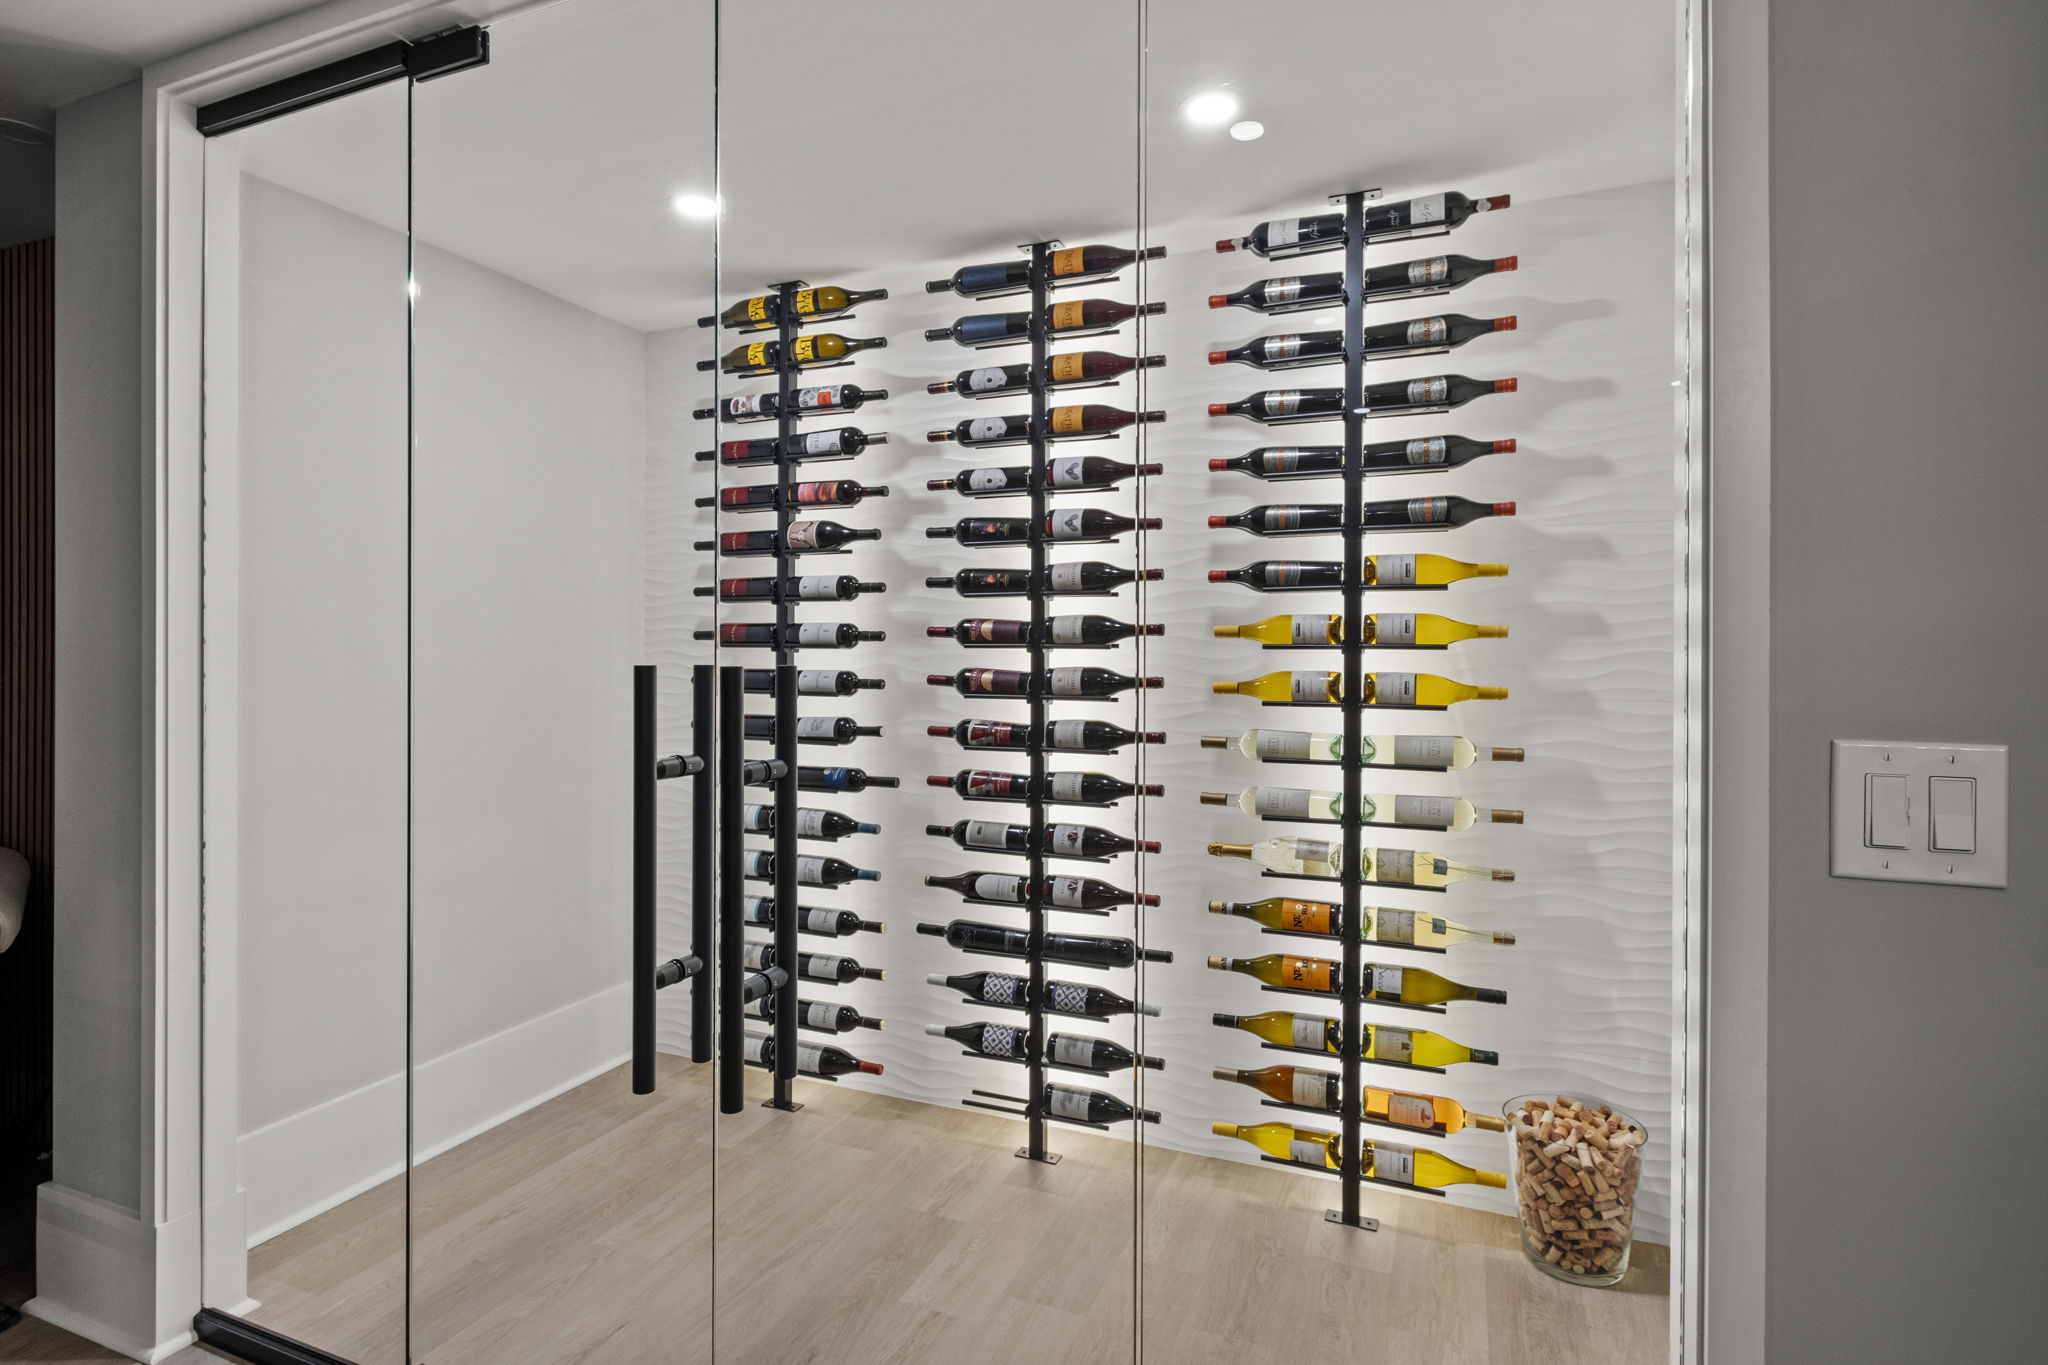 These wine room doors are an excellent way to showcase your collection!